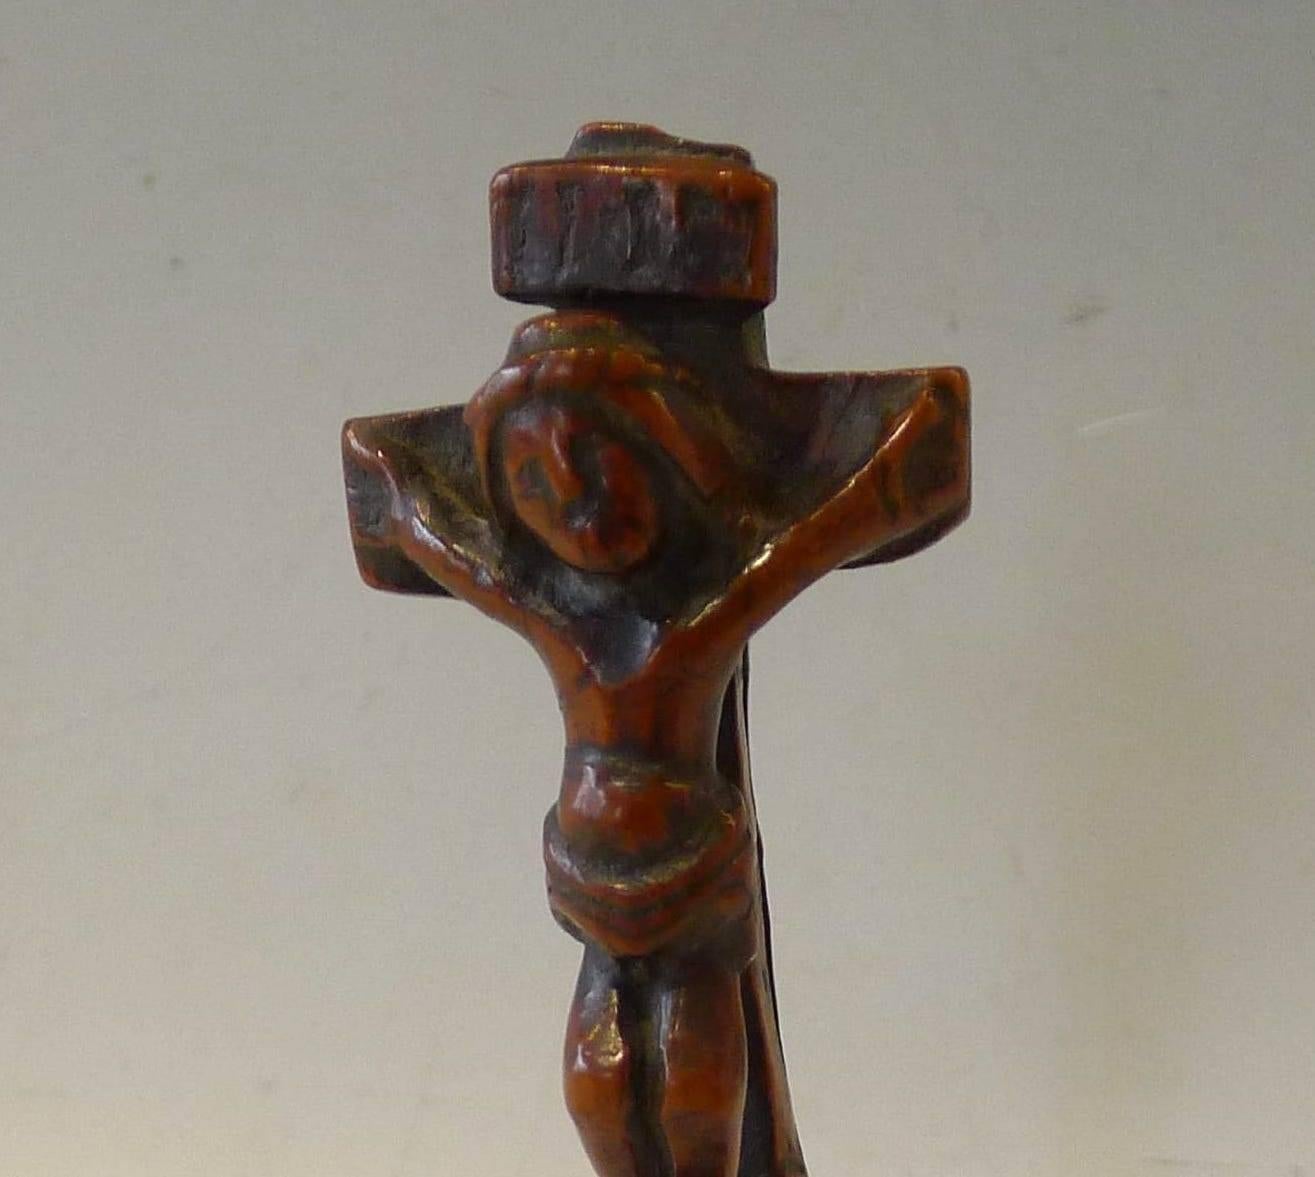 Small cross in boxwood (monoxyle: in one piece of tree) representing the Crucifixion with partially low a Vanitas.
Carried around the neck and serving as amulet.

Rare Folk Art.

Beautiful patina.